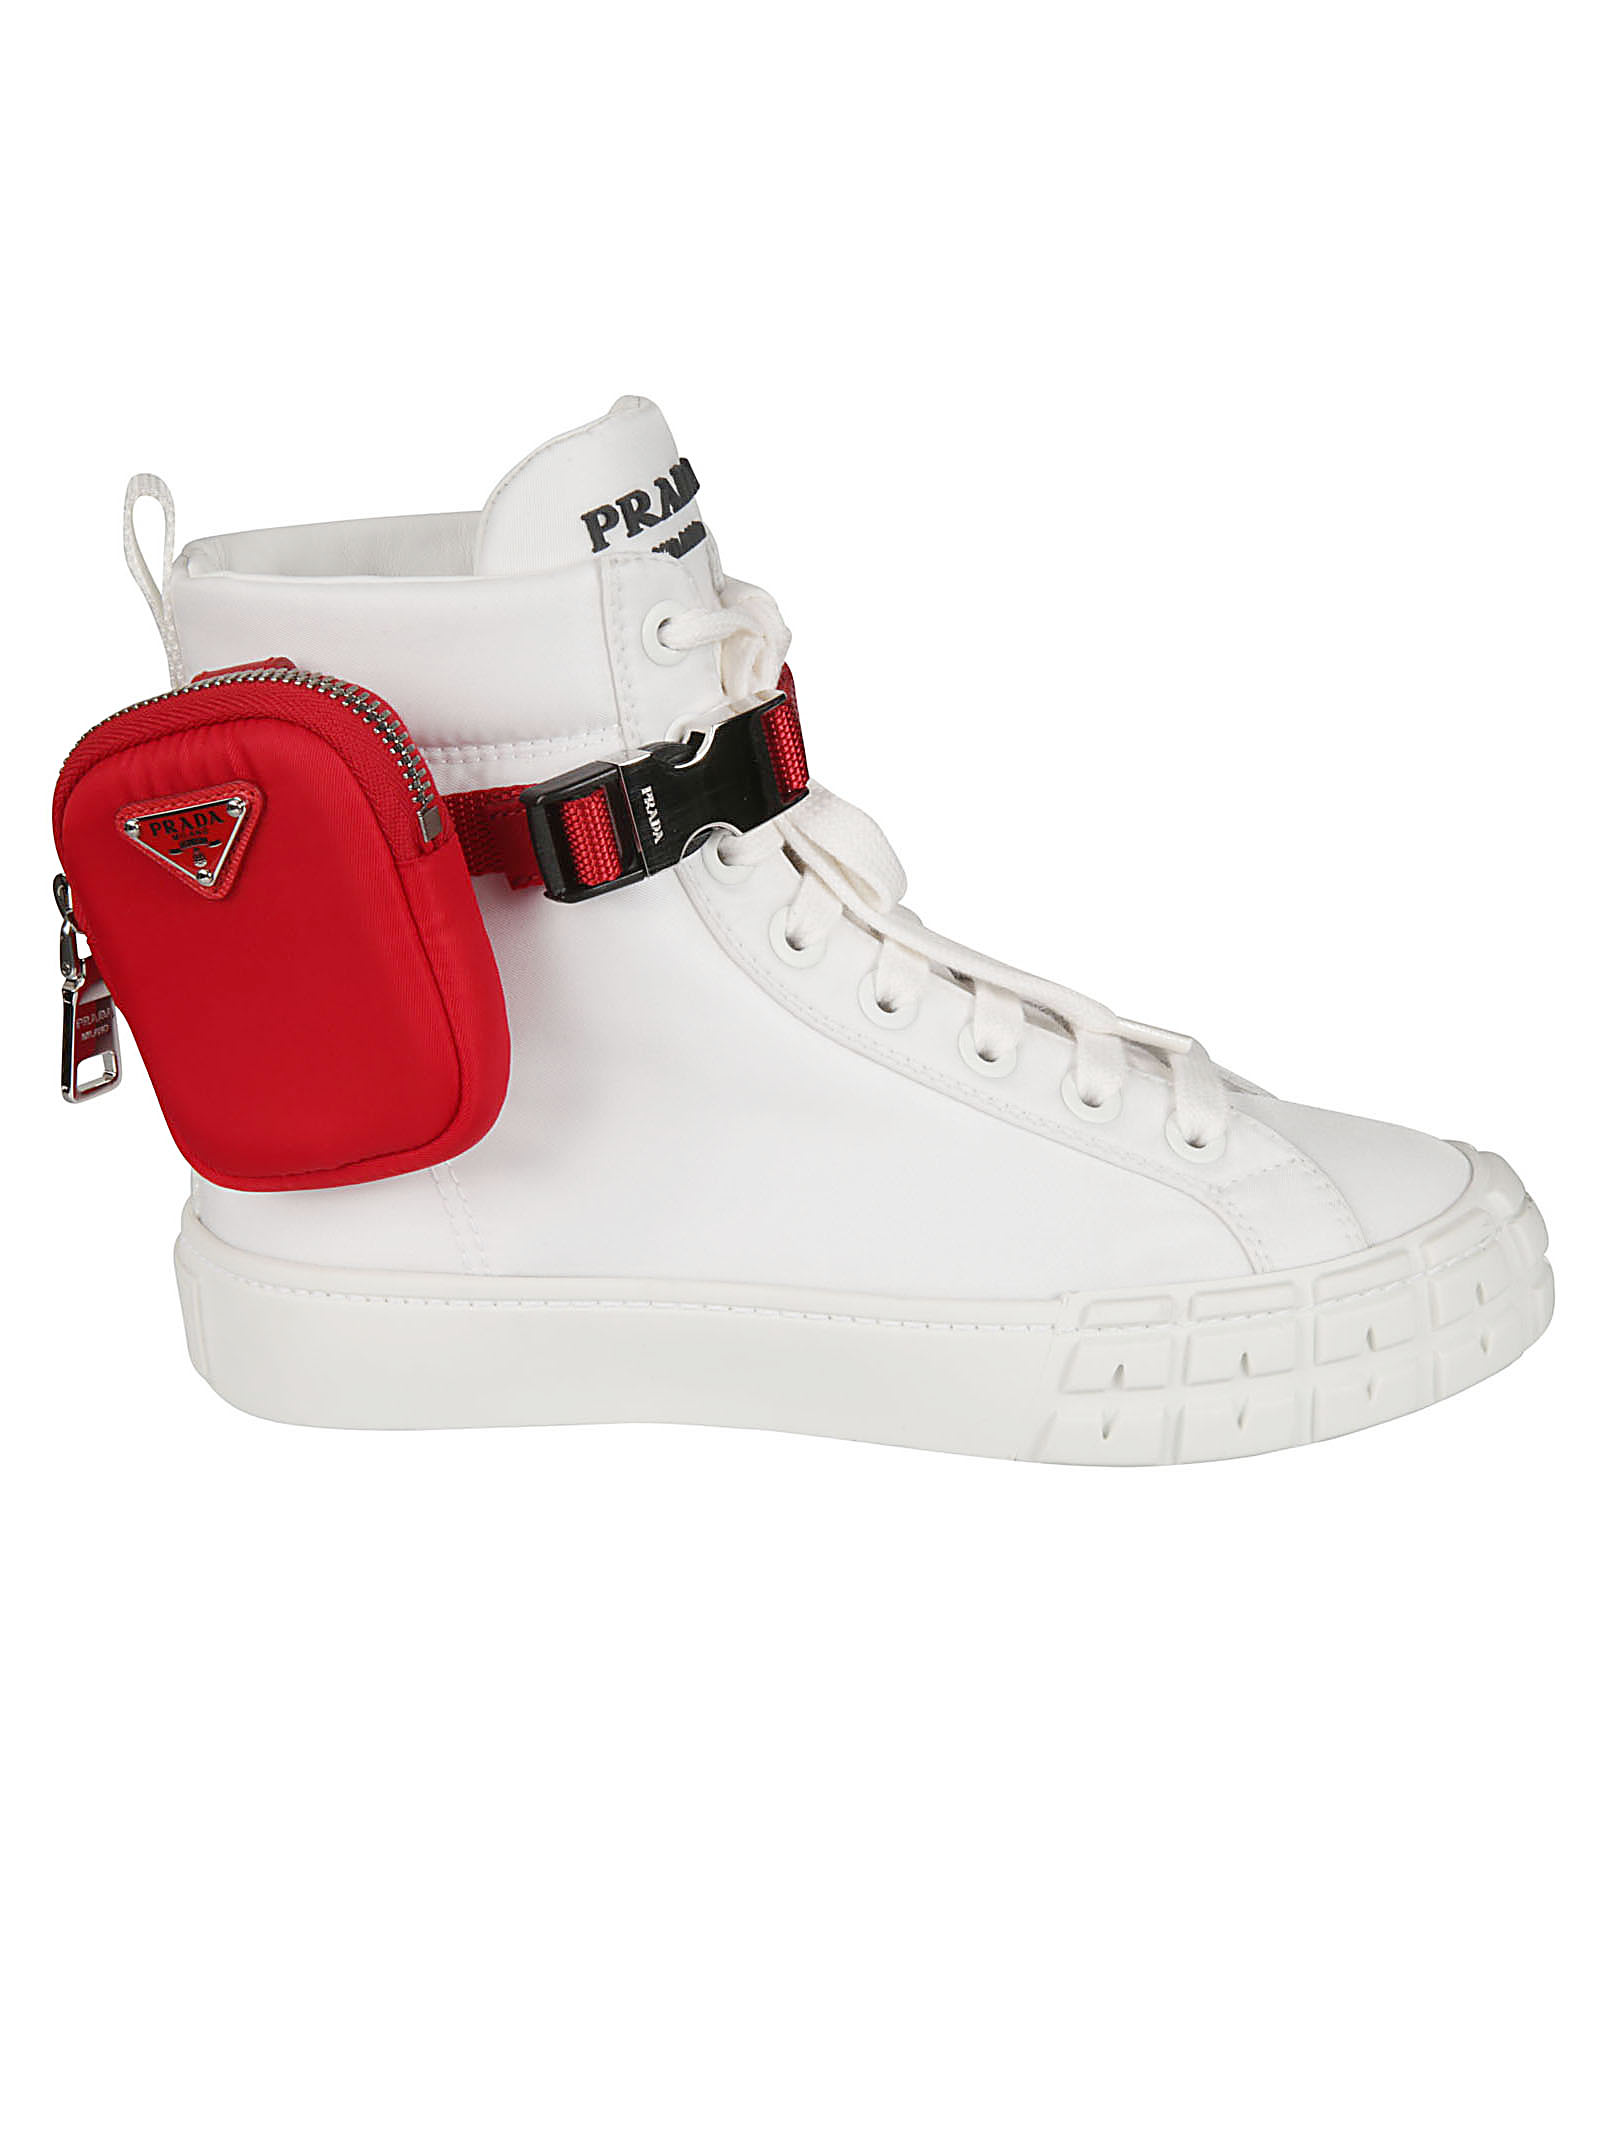 Buy Prada Pouch Applique Sneakers online, shop Prada shoes with free shipping